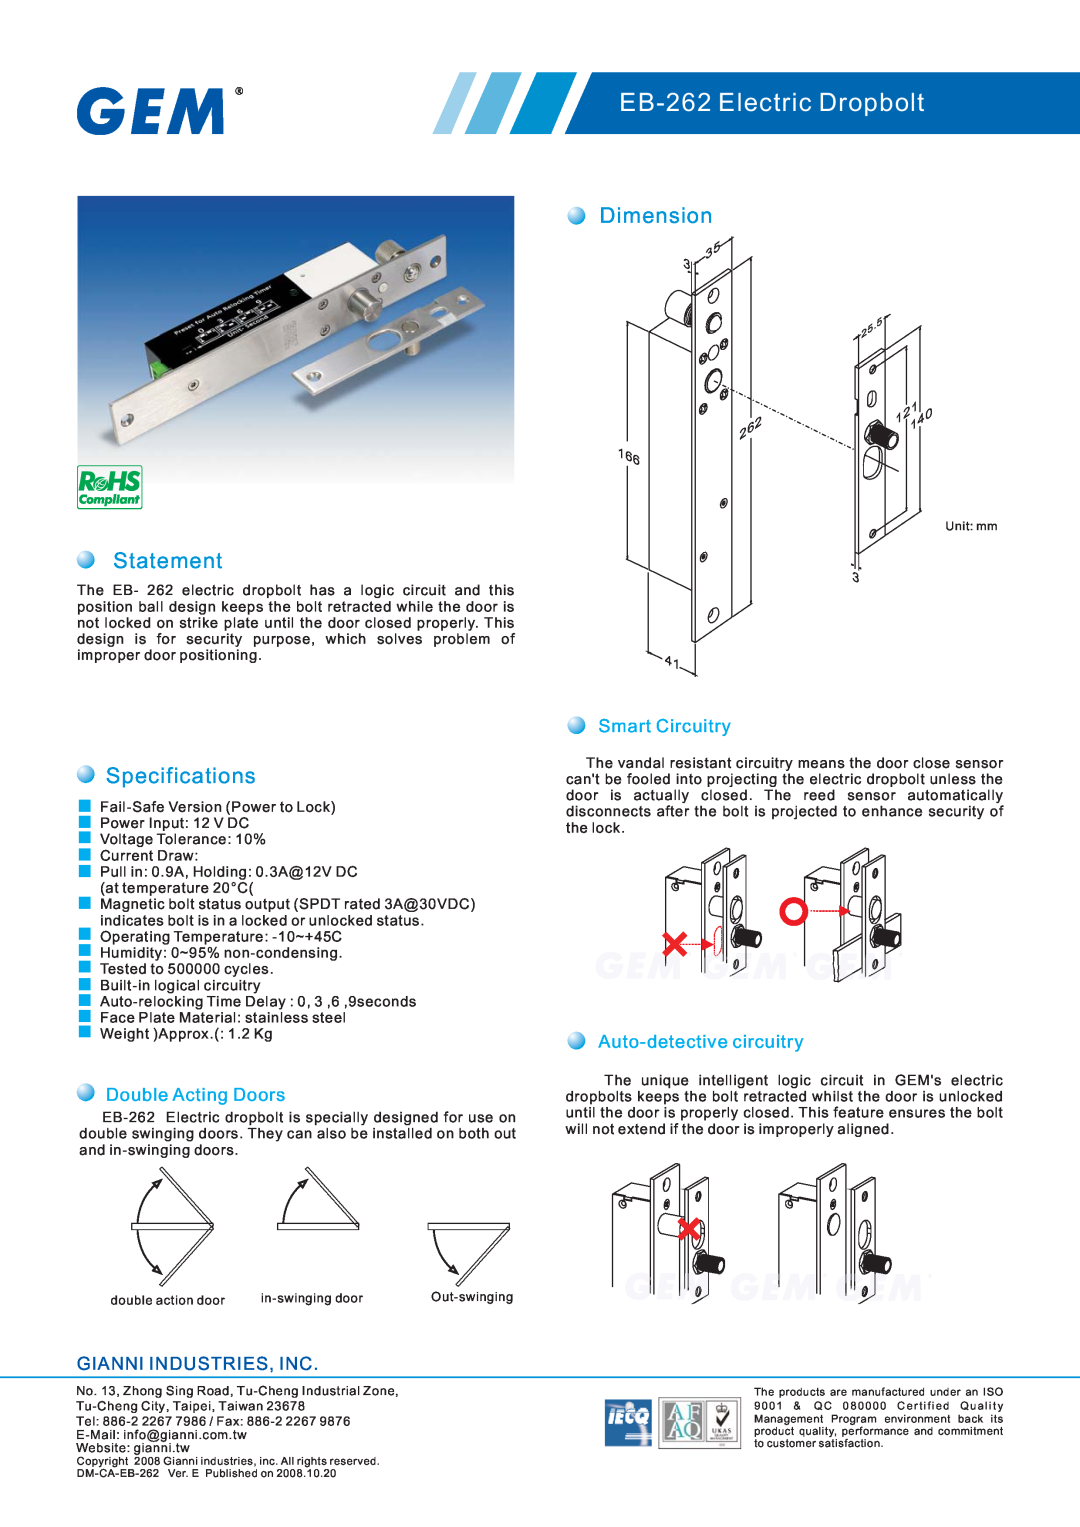 Gianni Industries specifications EB-262 Electric Dropbolt, Dimension, Statement, Specifications, Gianni Industries, Inc 